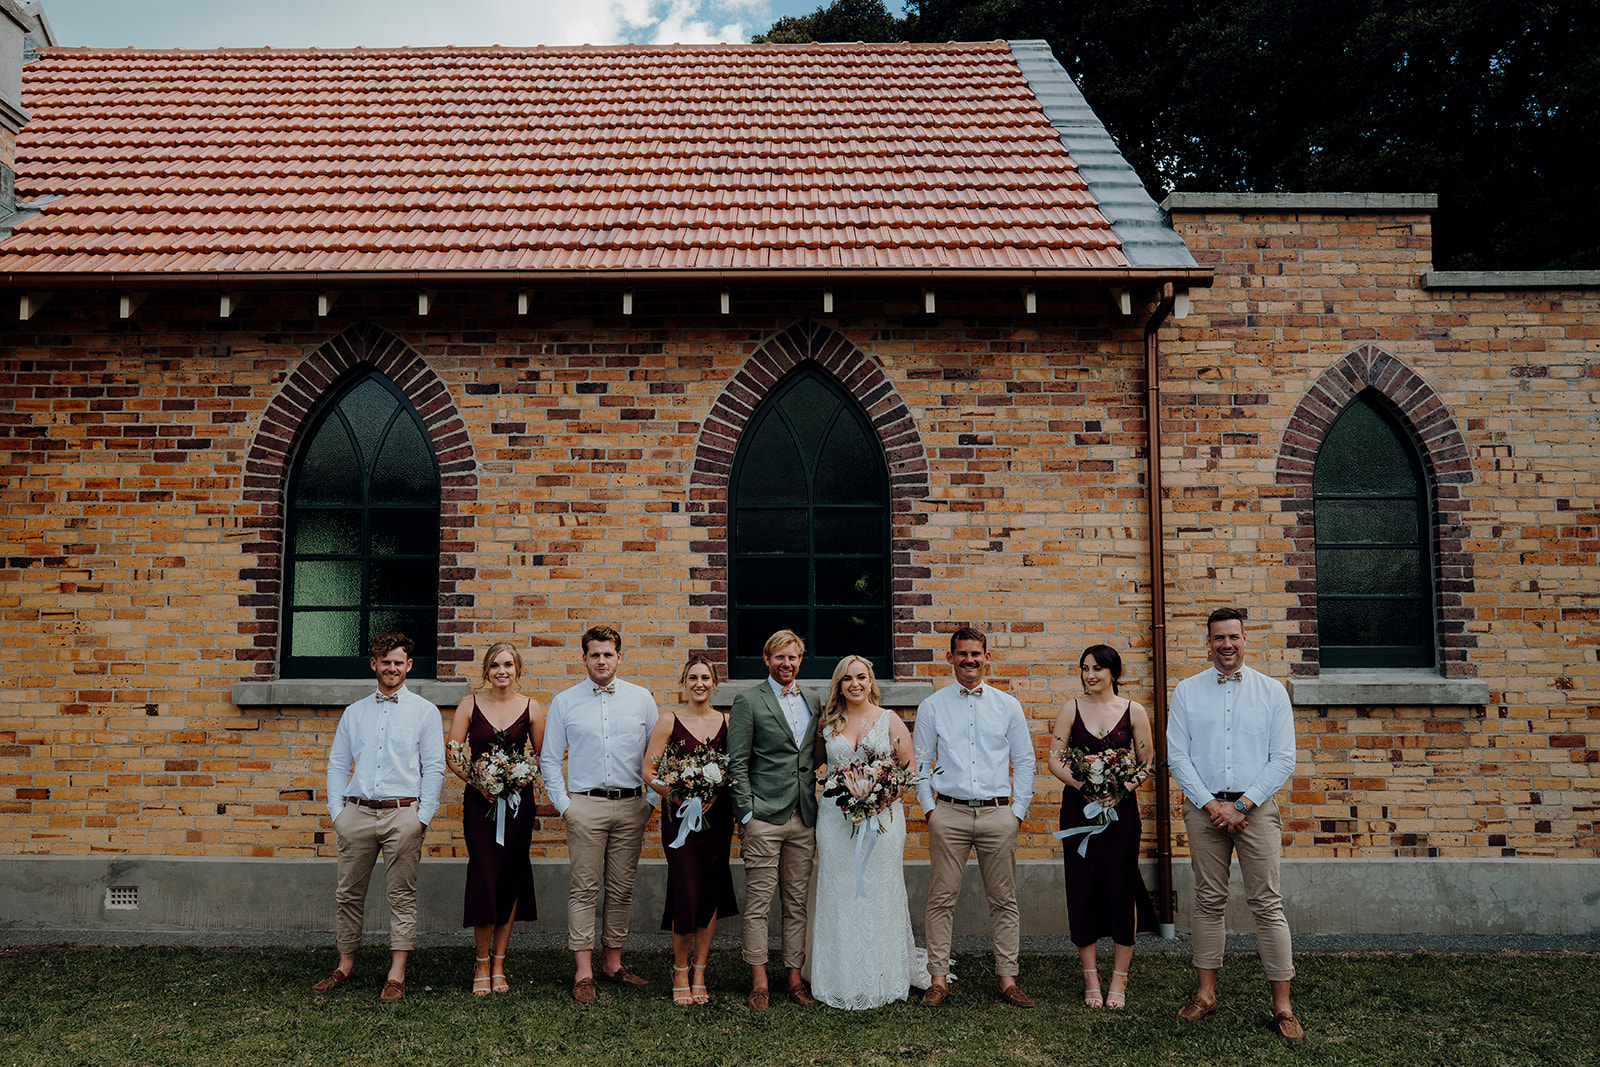 A wedding party with the bride and groom being photographed against the brick walls of the church by Waikato photographer Haley Adele Photography